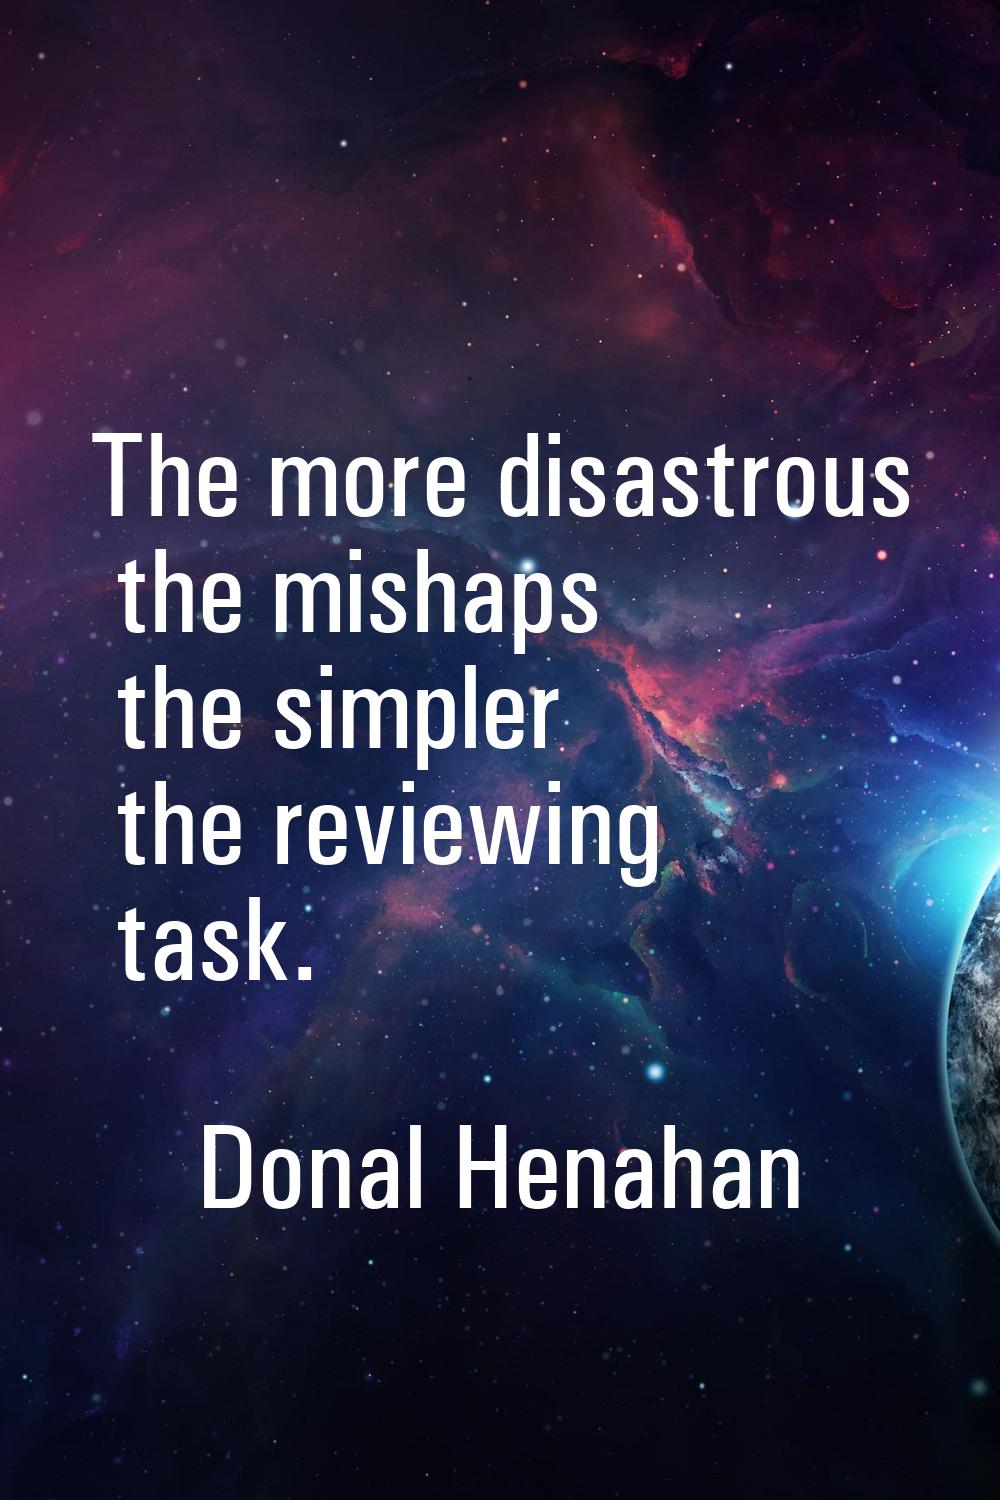 The more disastrous the mishaps the simpler the reviewing task.